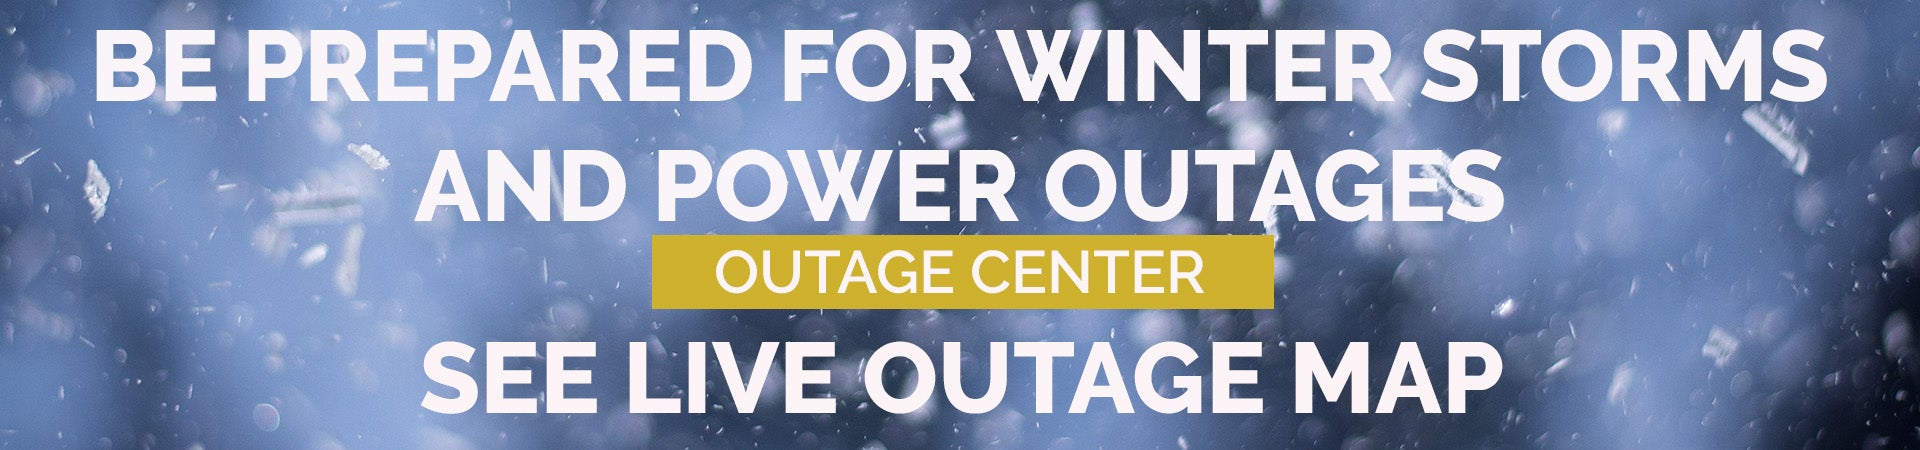 Be prepared for winter power outages